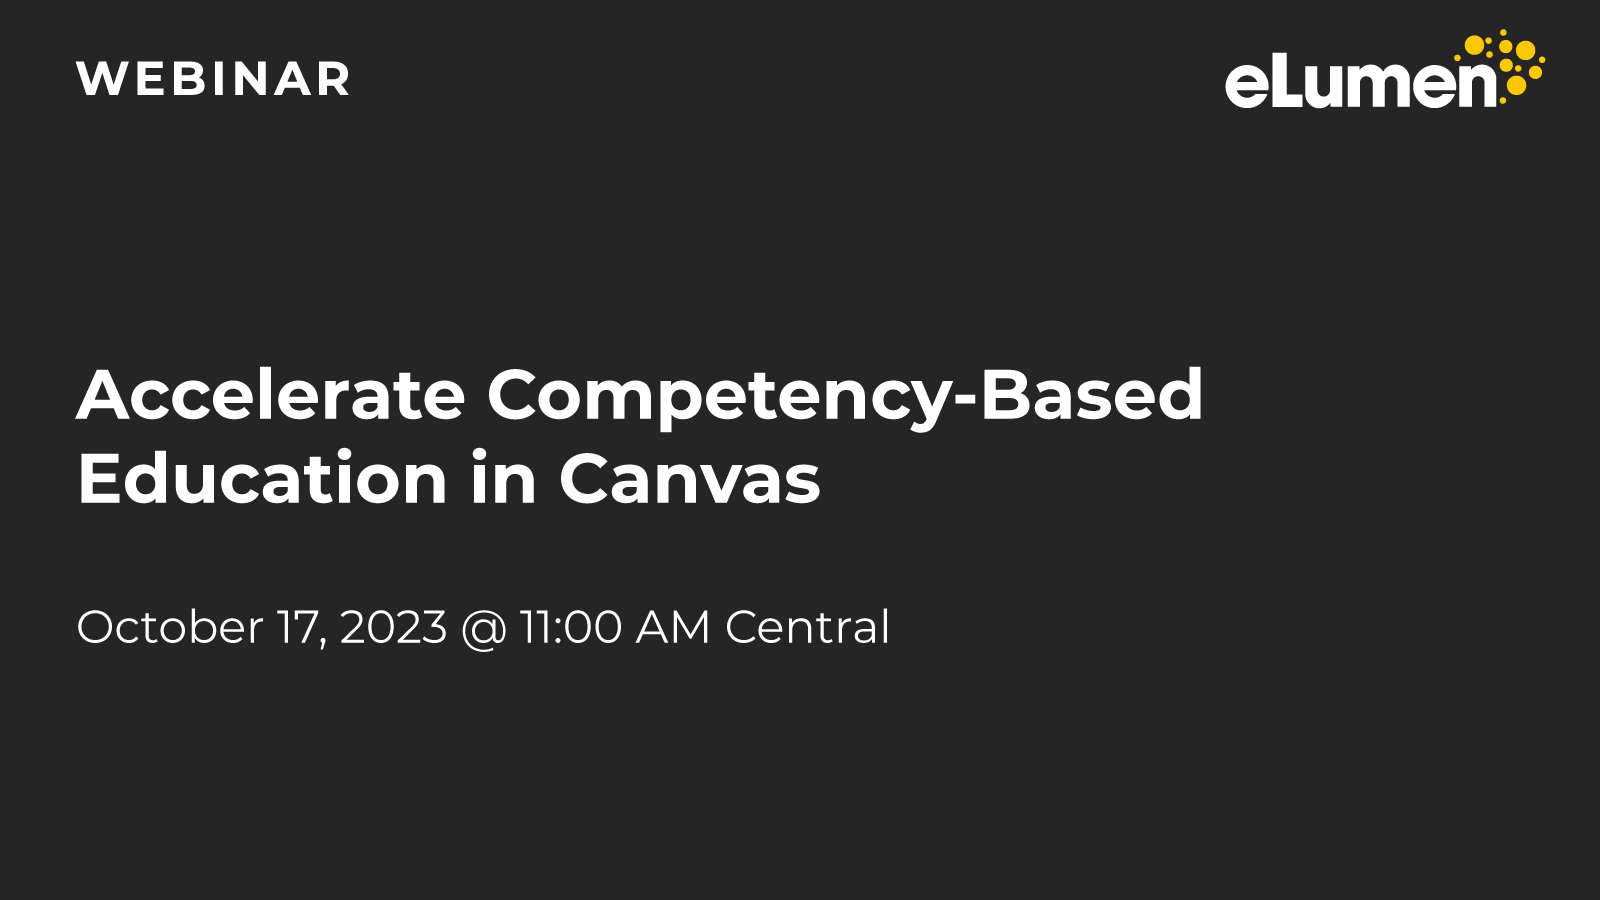 Accelerate Competency-Based Education in Canvas